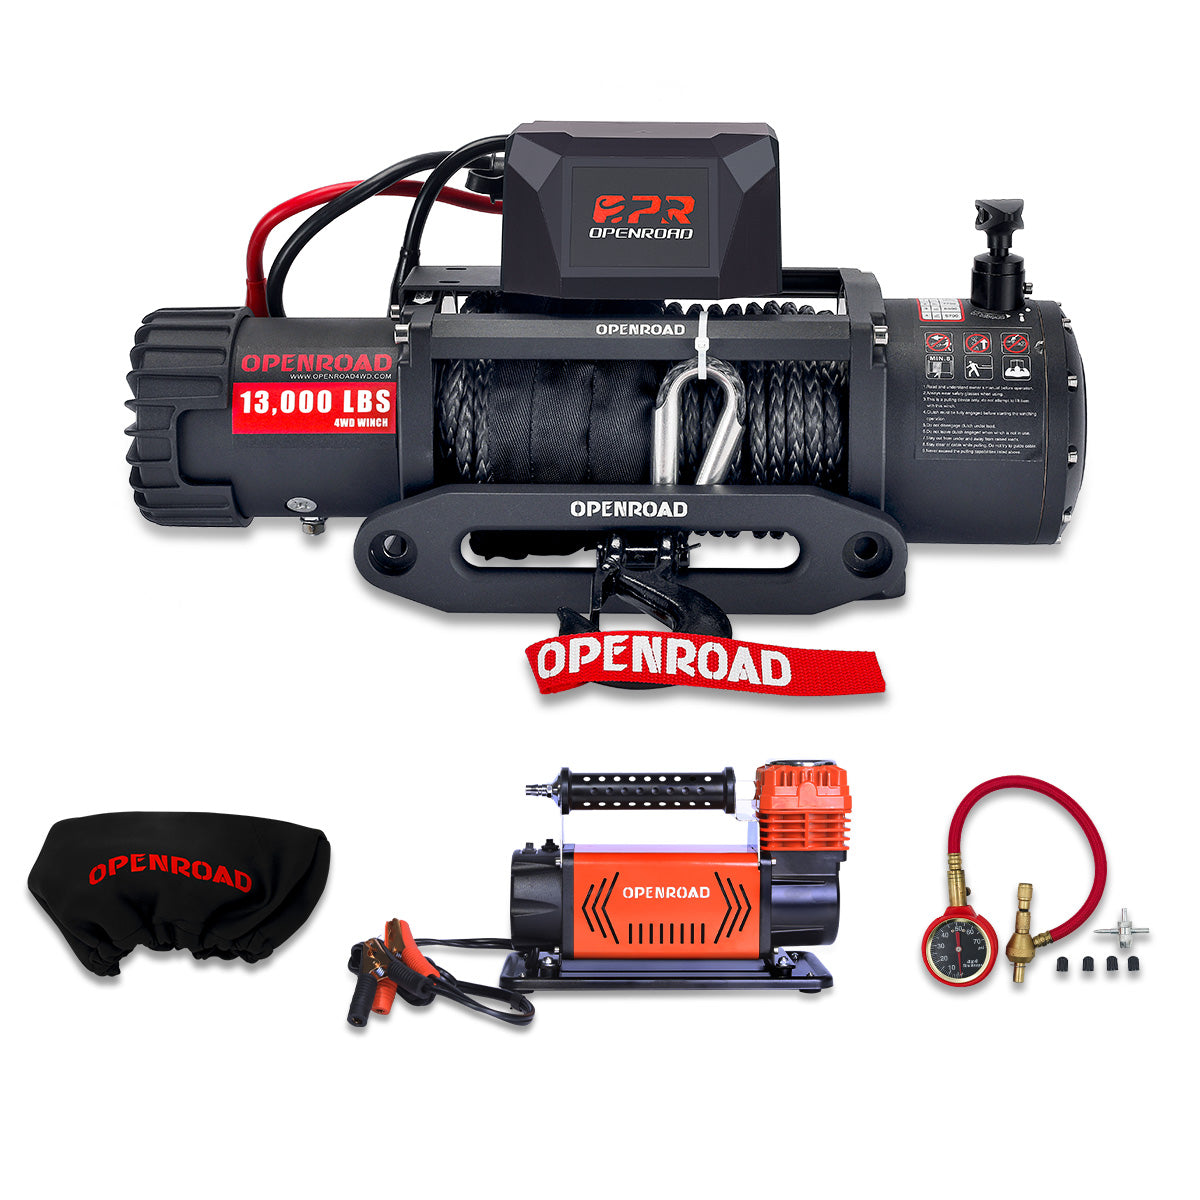 13000lbs Electric Winch with cover+5.65 CFM air compressor+Tire Pressure Gauge  openroad4wd.com   